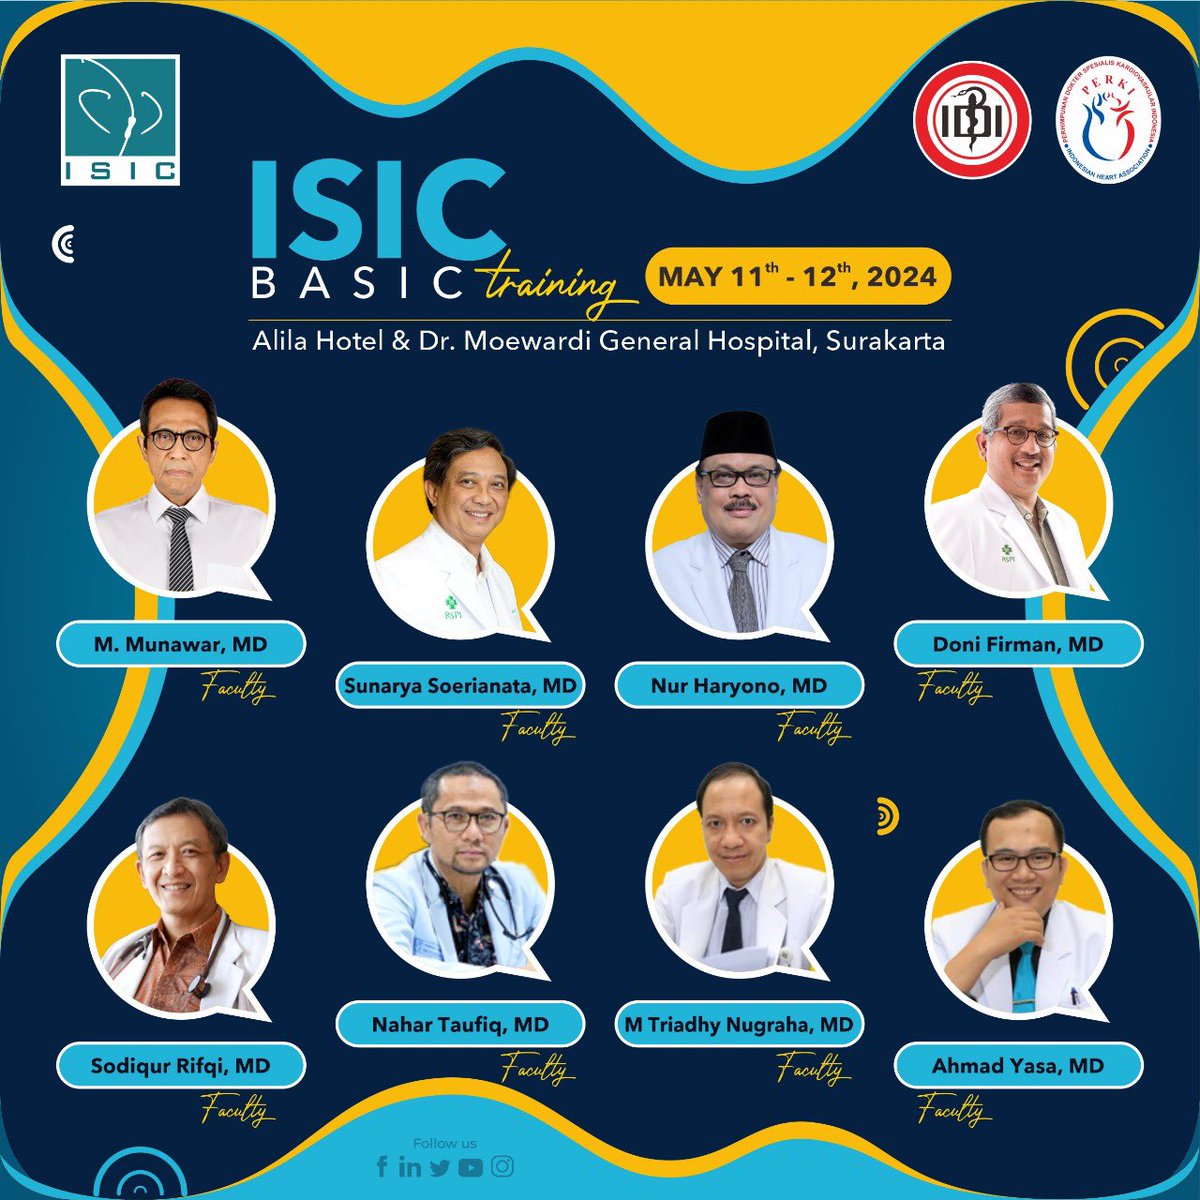 #ISIC Basic Training will be held in Alila Hotel & Moewardi General Hospital in Surakarta on 11-12 May 2024. Learn from the experts to start your interventional cardiology journey. @uziyahya46